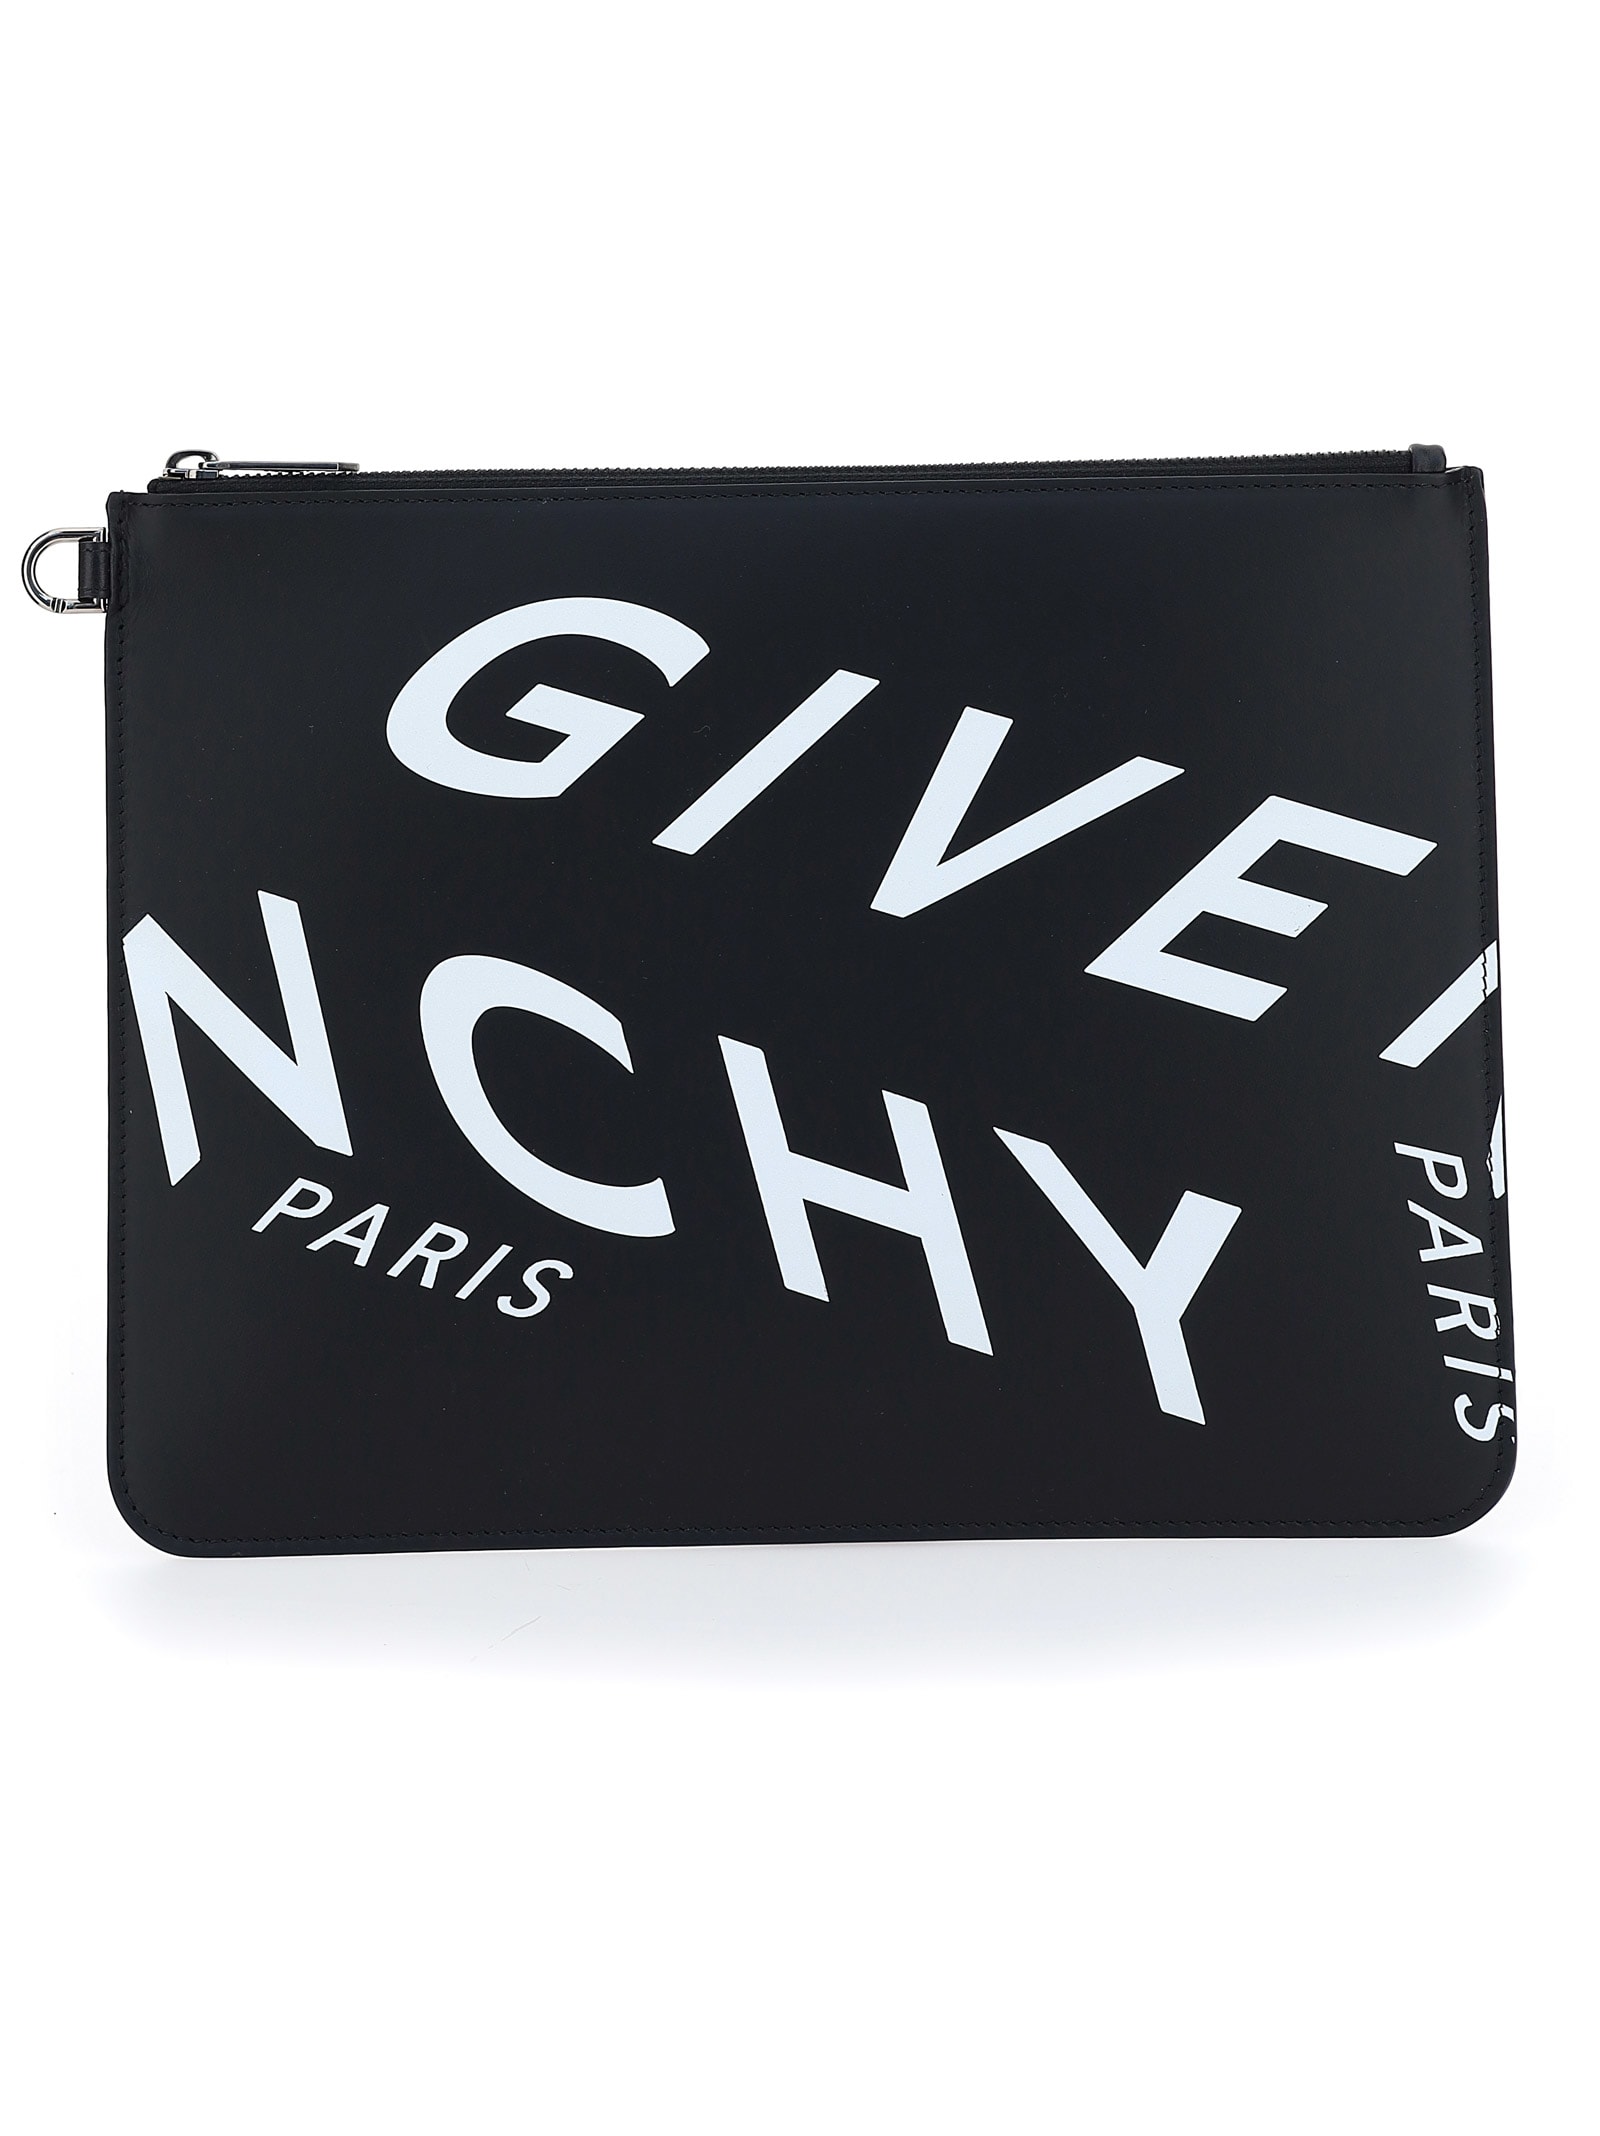 Givenchy Pouch